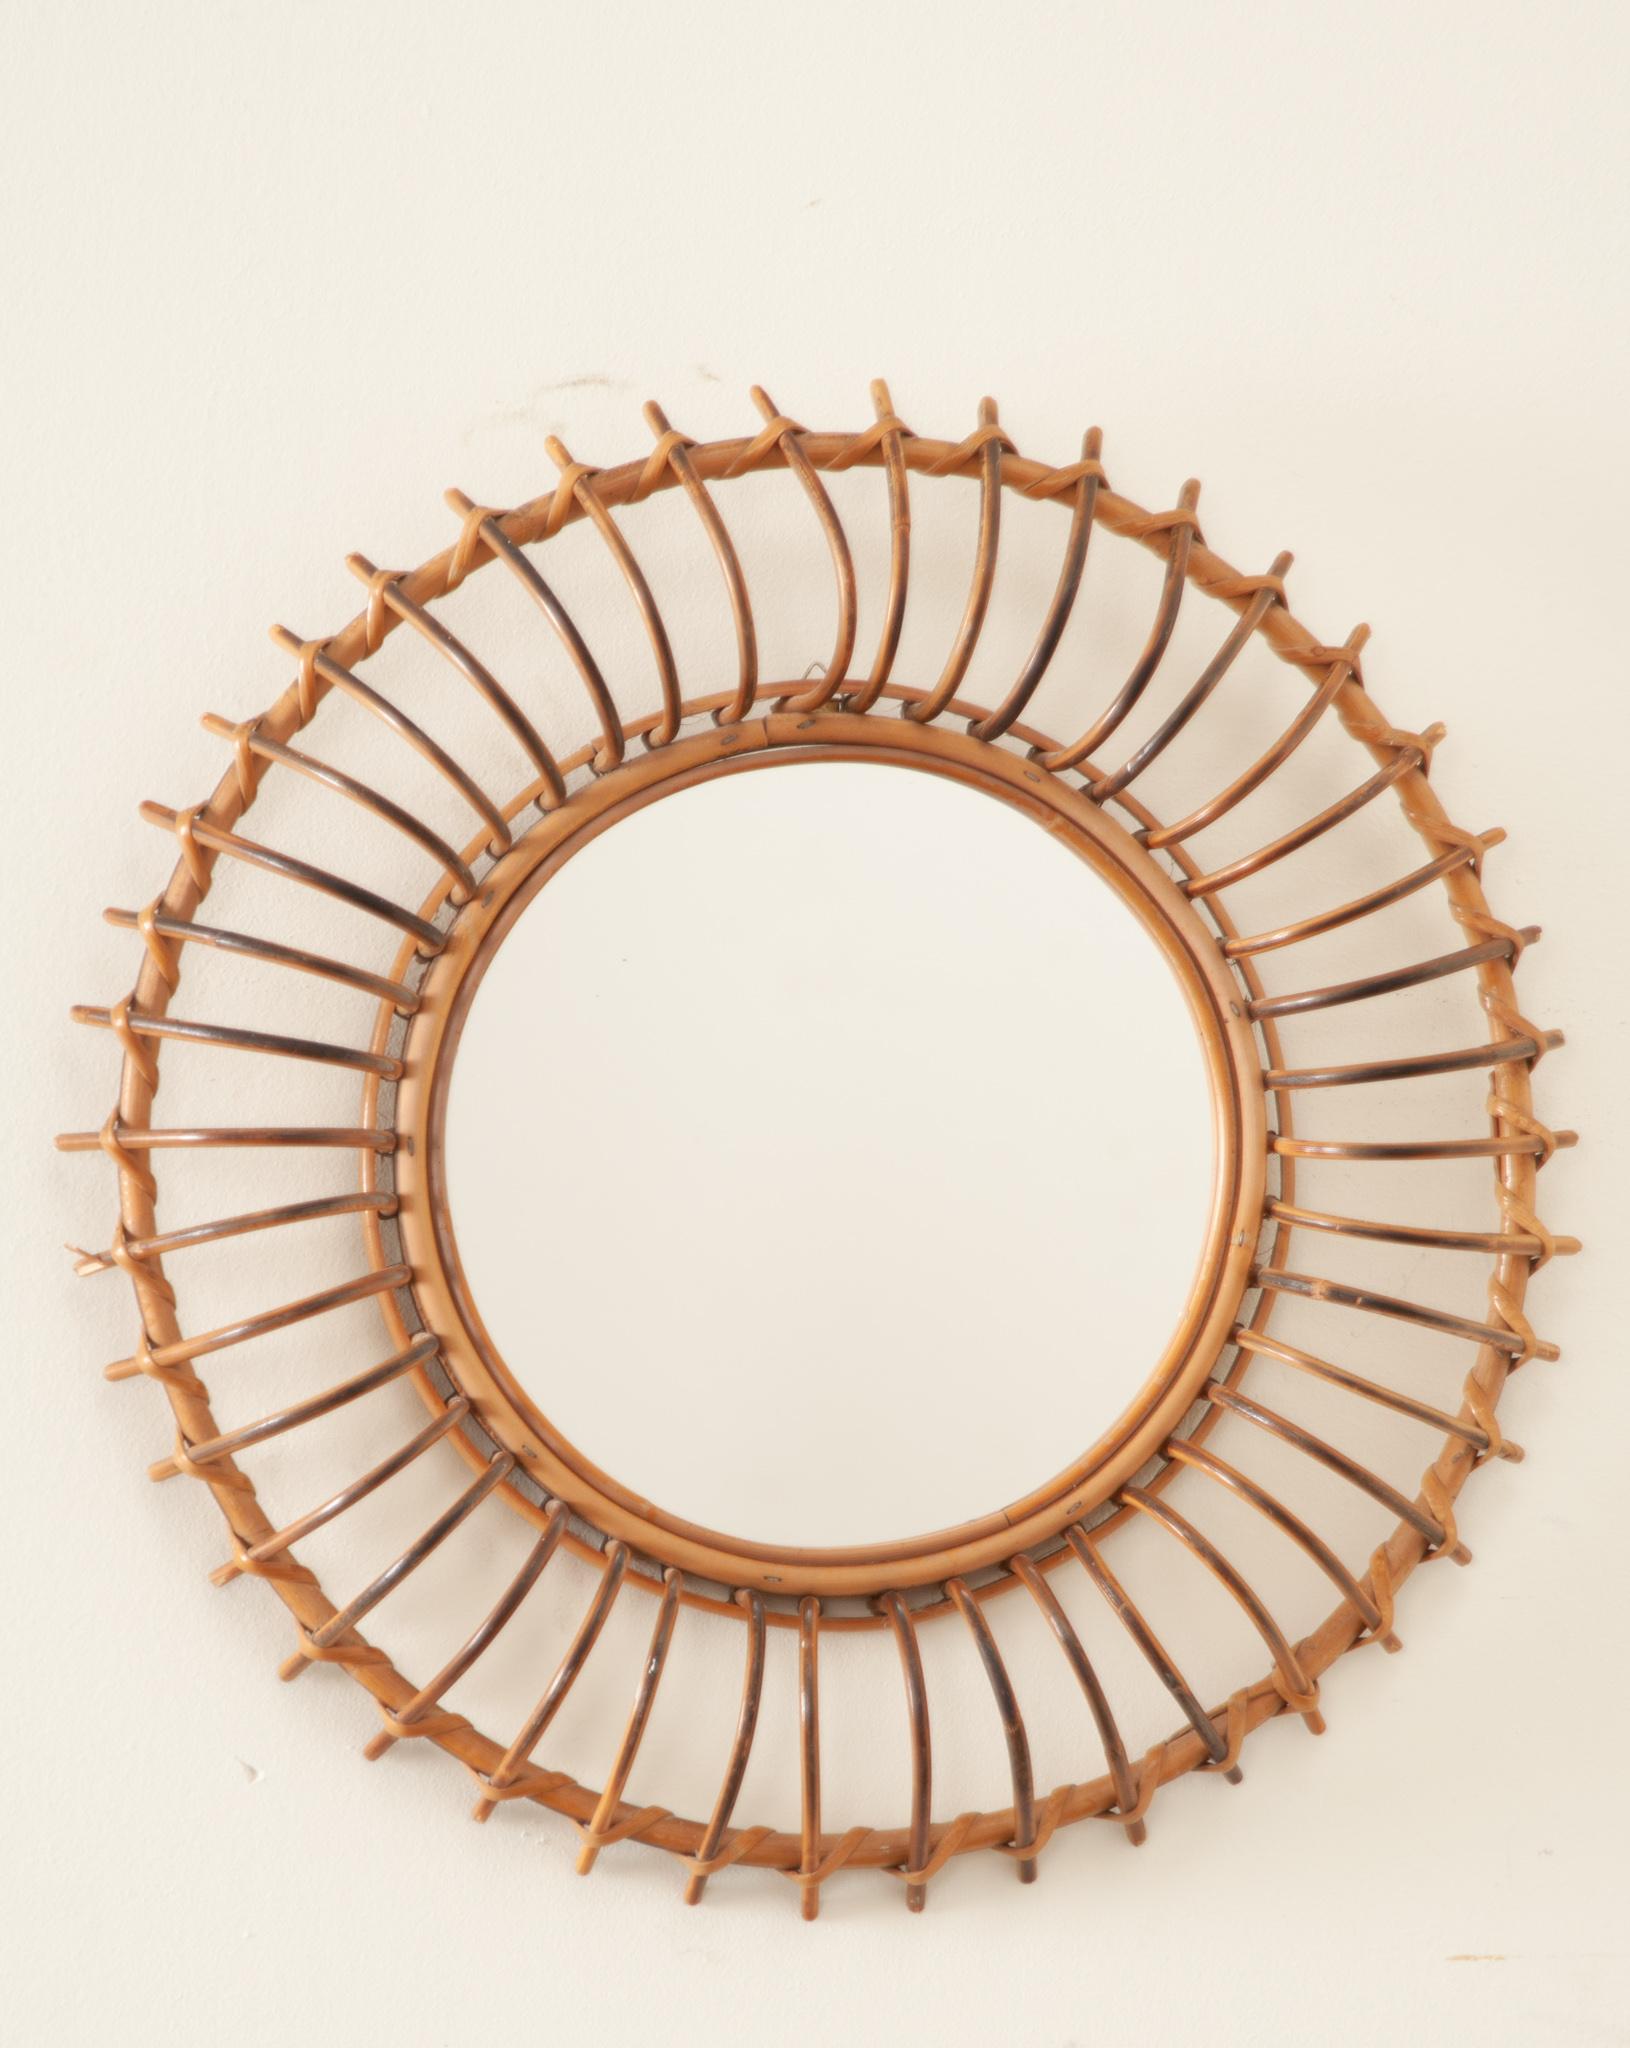 A groovy round rattan mirror from France. Eye-catching and lovely with a sunburst design on honeyed brown rattan. This handcrafted mirror would be a nice addition to a beach house, country home or urban bohemian apartment. A cool accent placed alone